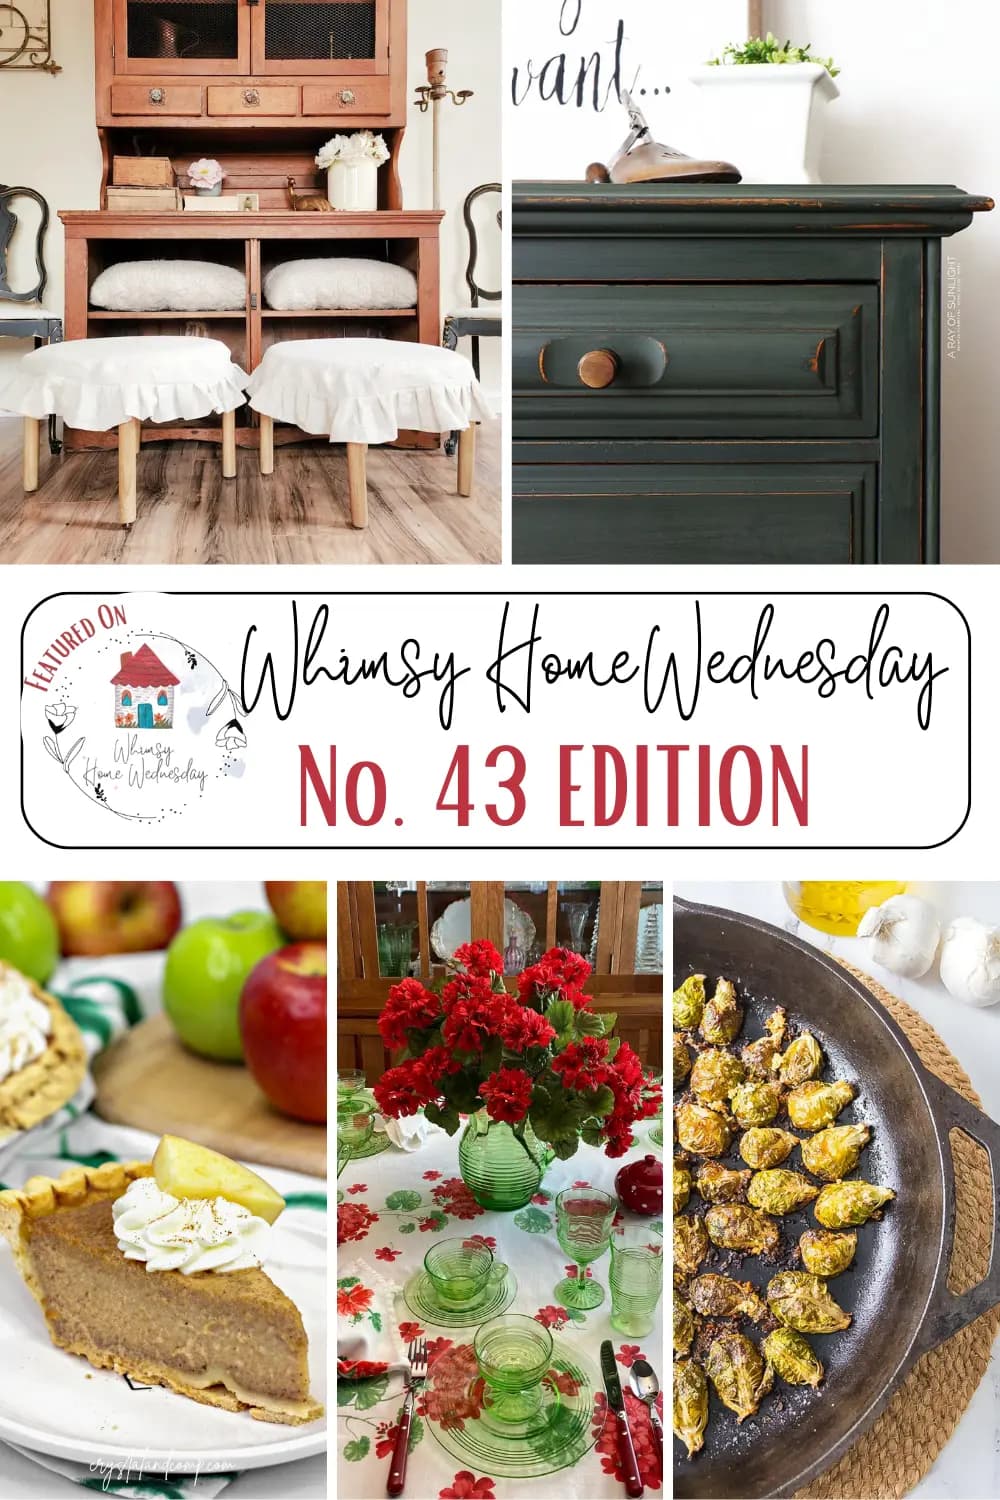 Join us on Whimsy Home Wednesday Blog Link Party No. 43 and see host projects, the features from the previous week and link up your posts!